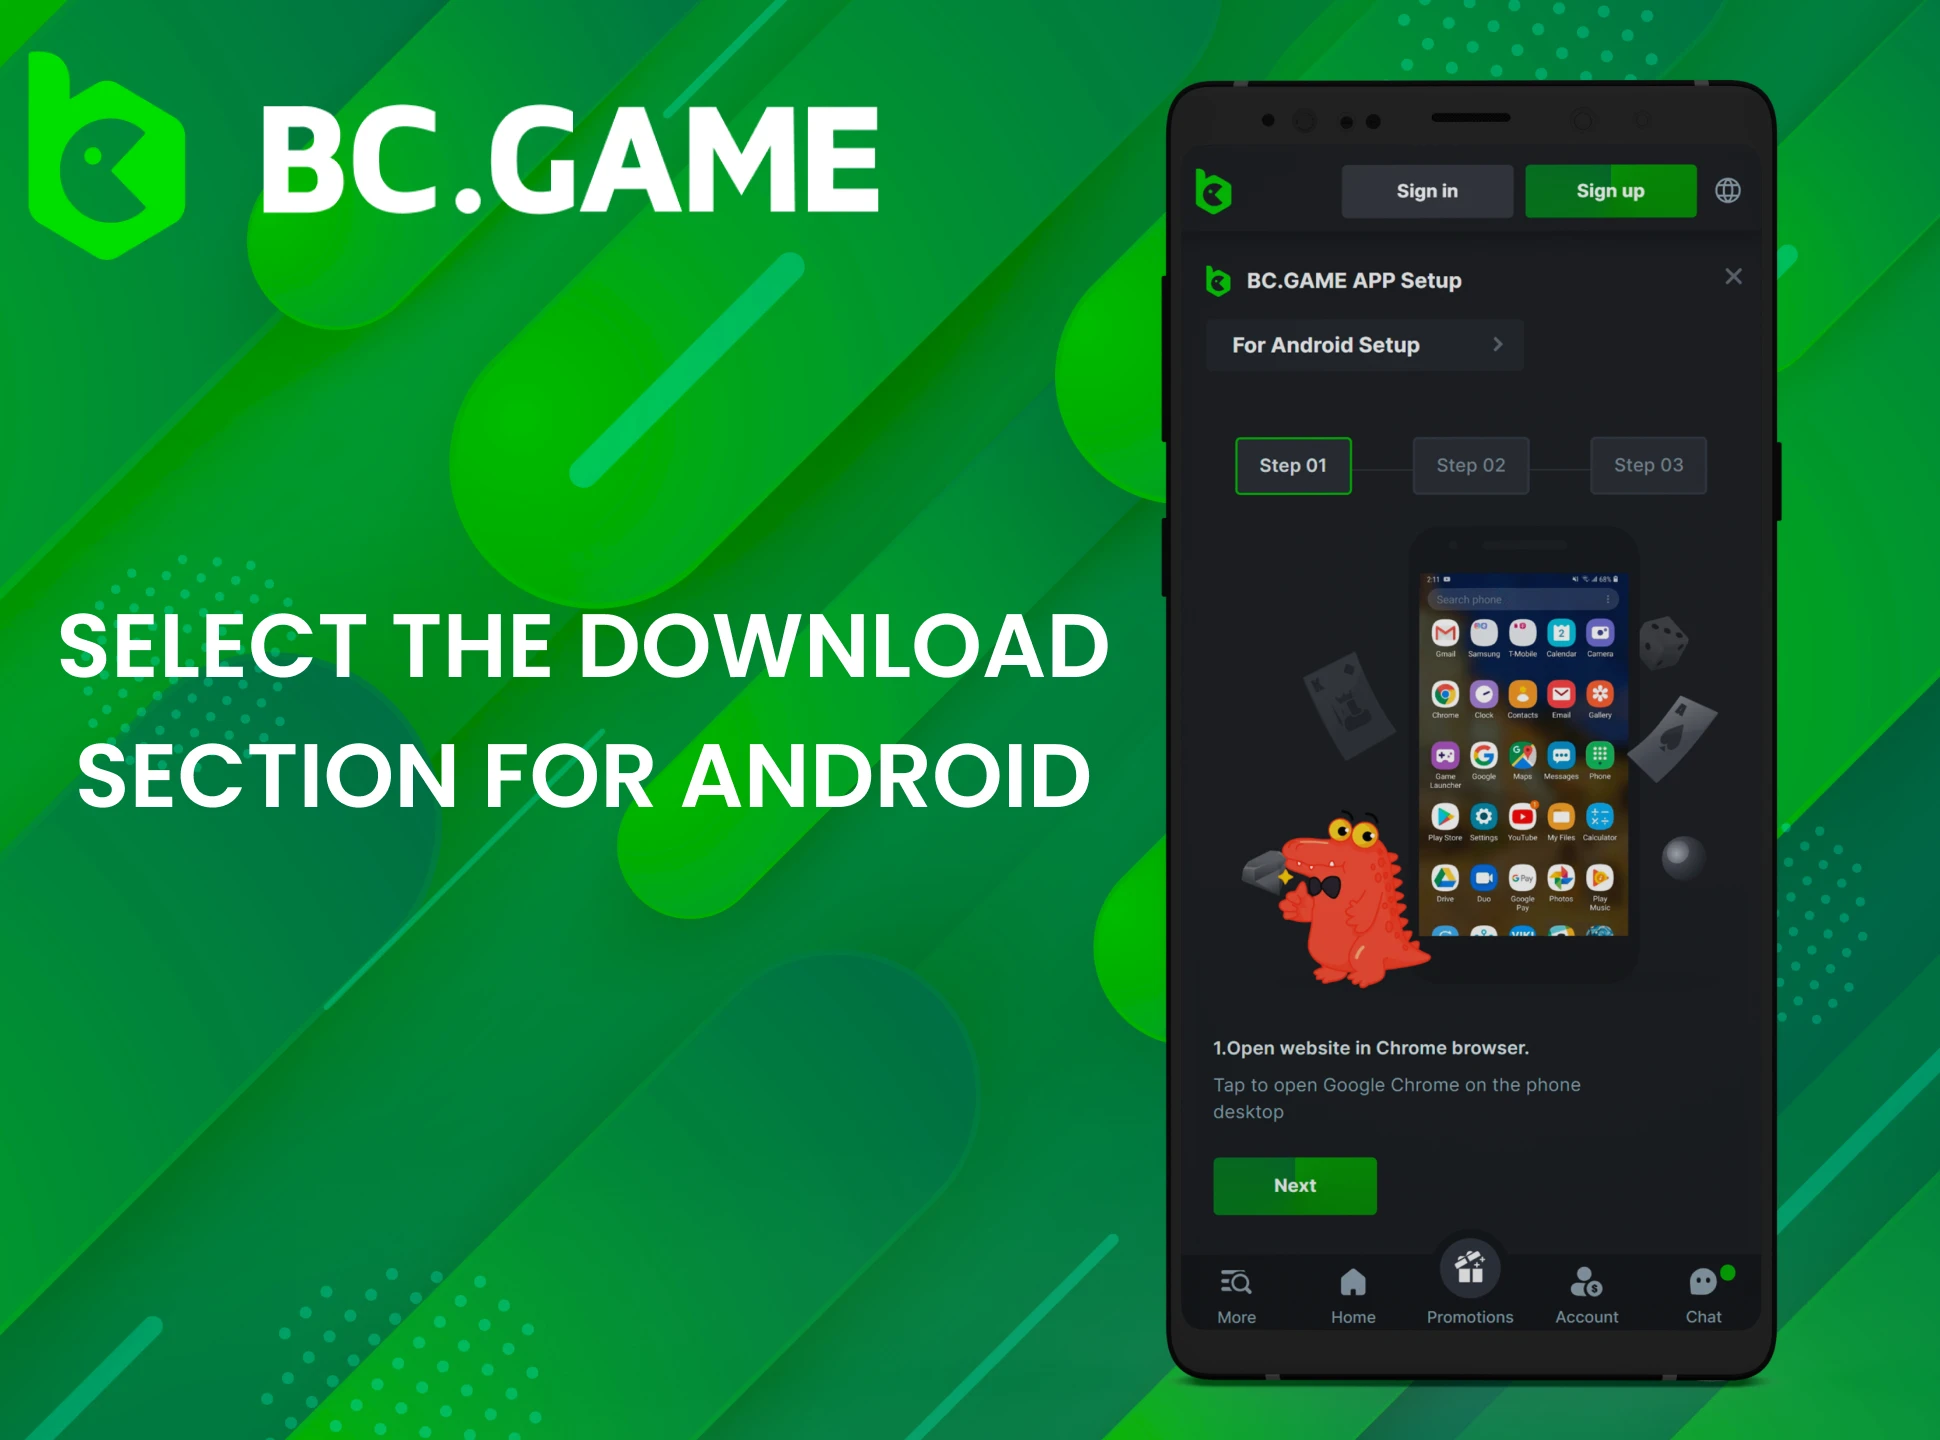 On the BC Game website, look for the application download section.